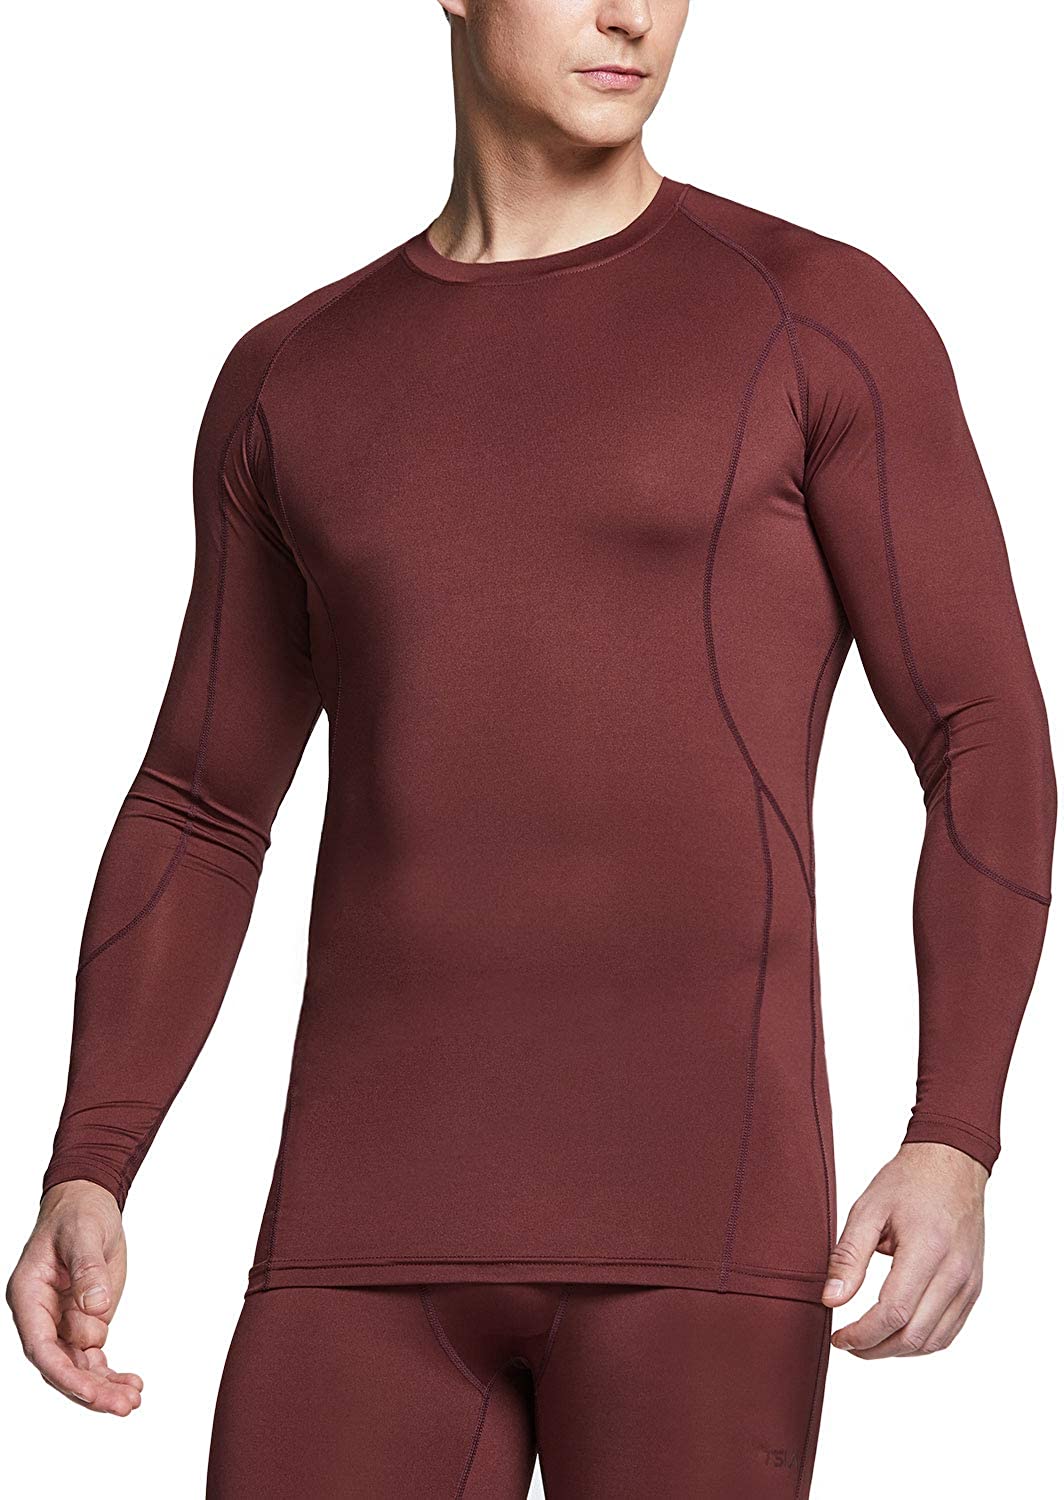 PULSE MENS THERMAL COLD WEATHER BASE LAYER COMPRESSION TOP MACHINE WASHABLE 